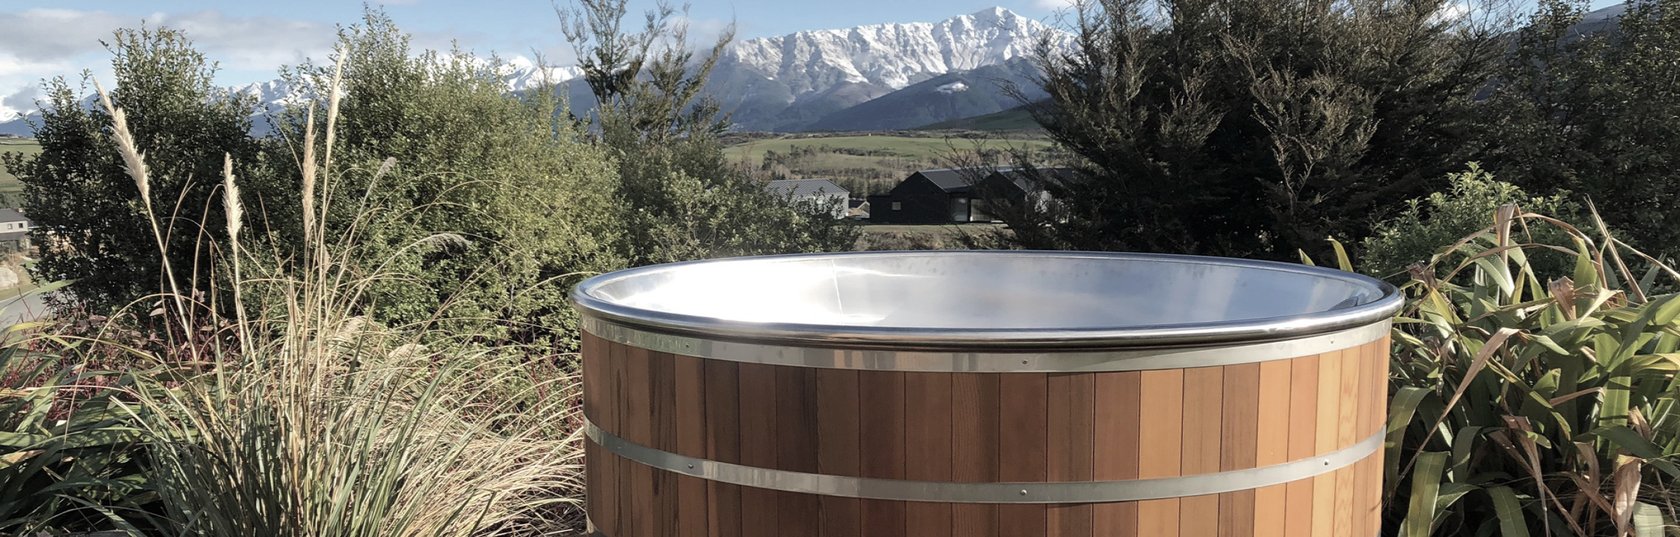 Wood Fired Hot Tubs vs. Electric: What’s the Difference? | Stoked Hot Tubs